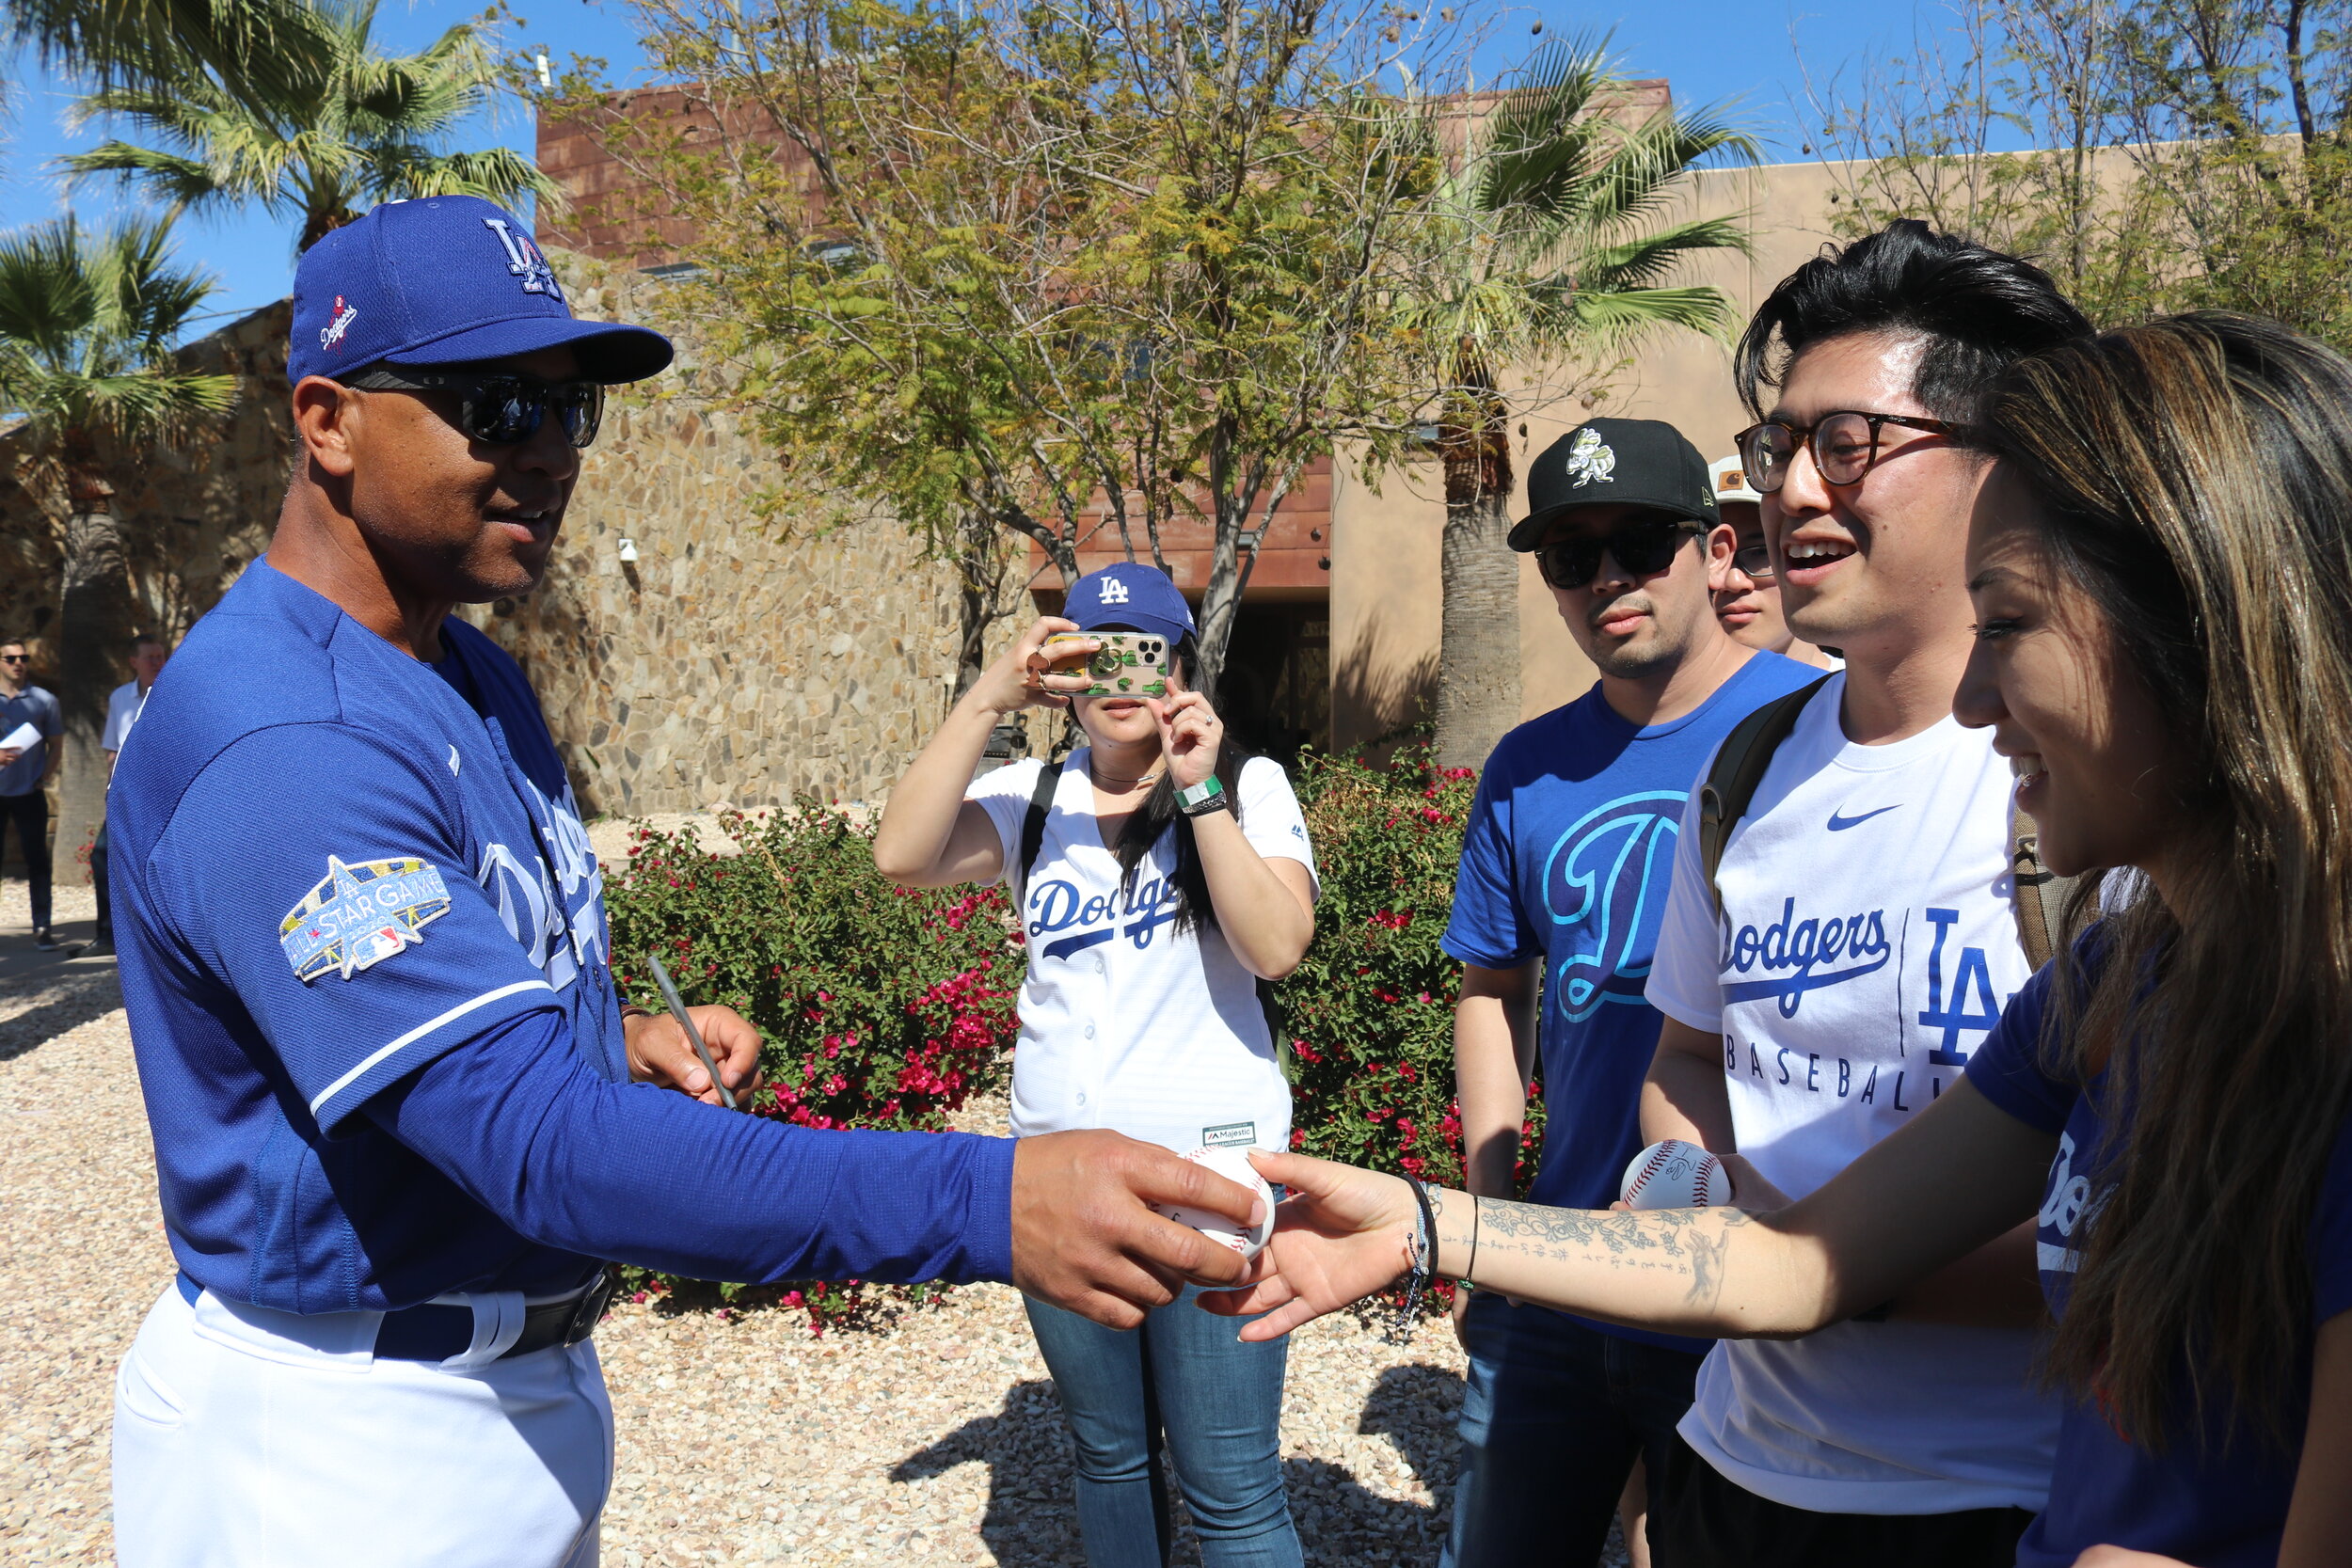 A man wearing a Dodgers jersey hands a fan a ball while another takes a photo.